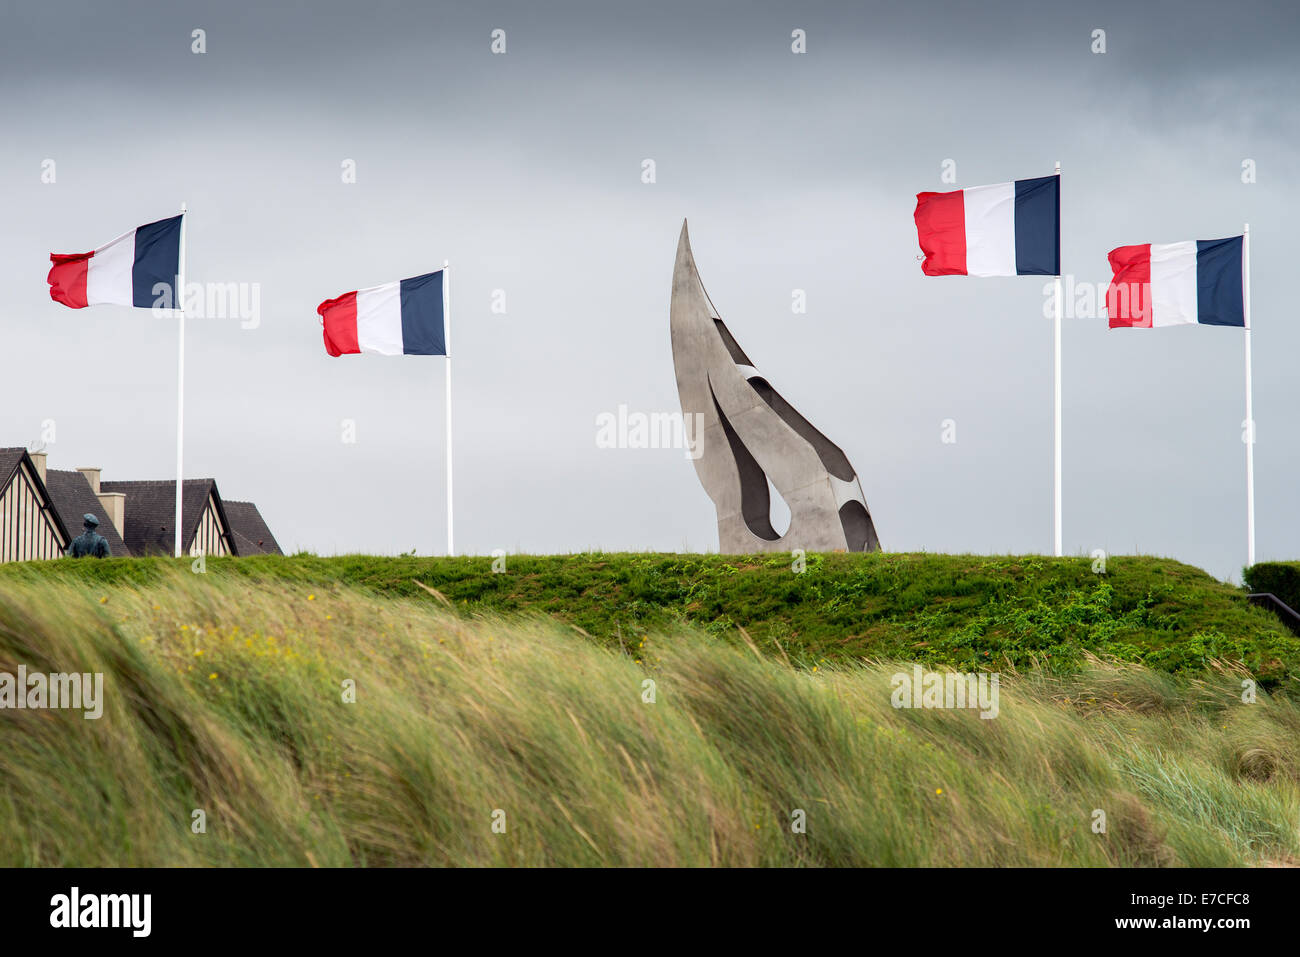 The Flame Monument at Sword beach, Ouistreham, Normandy, France. Stock Photo